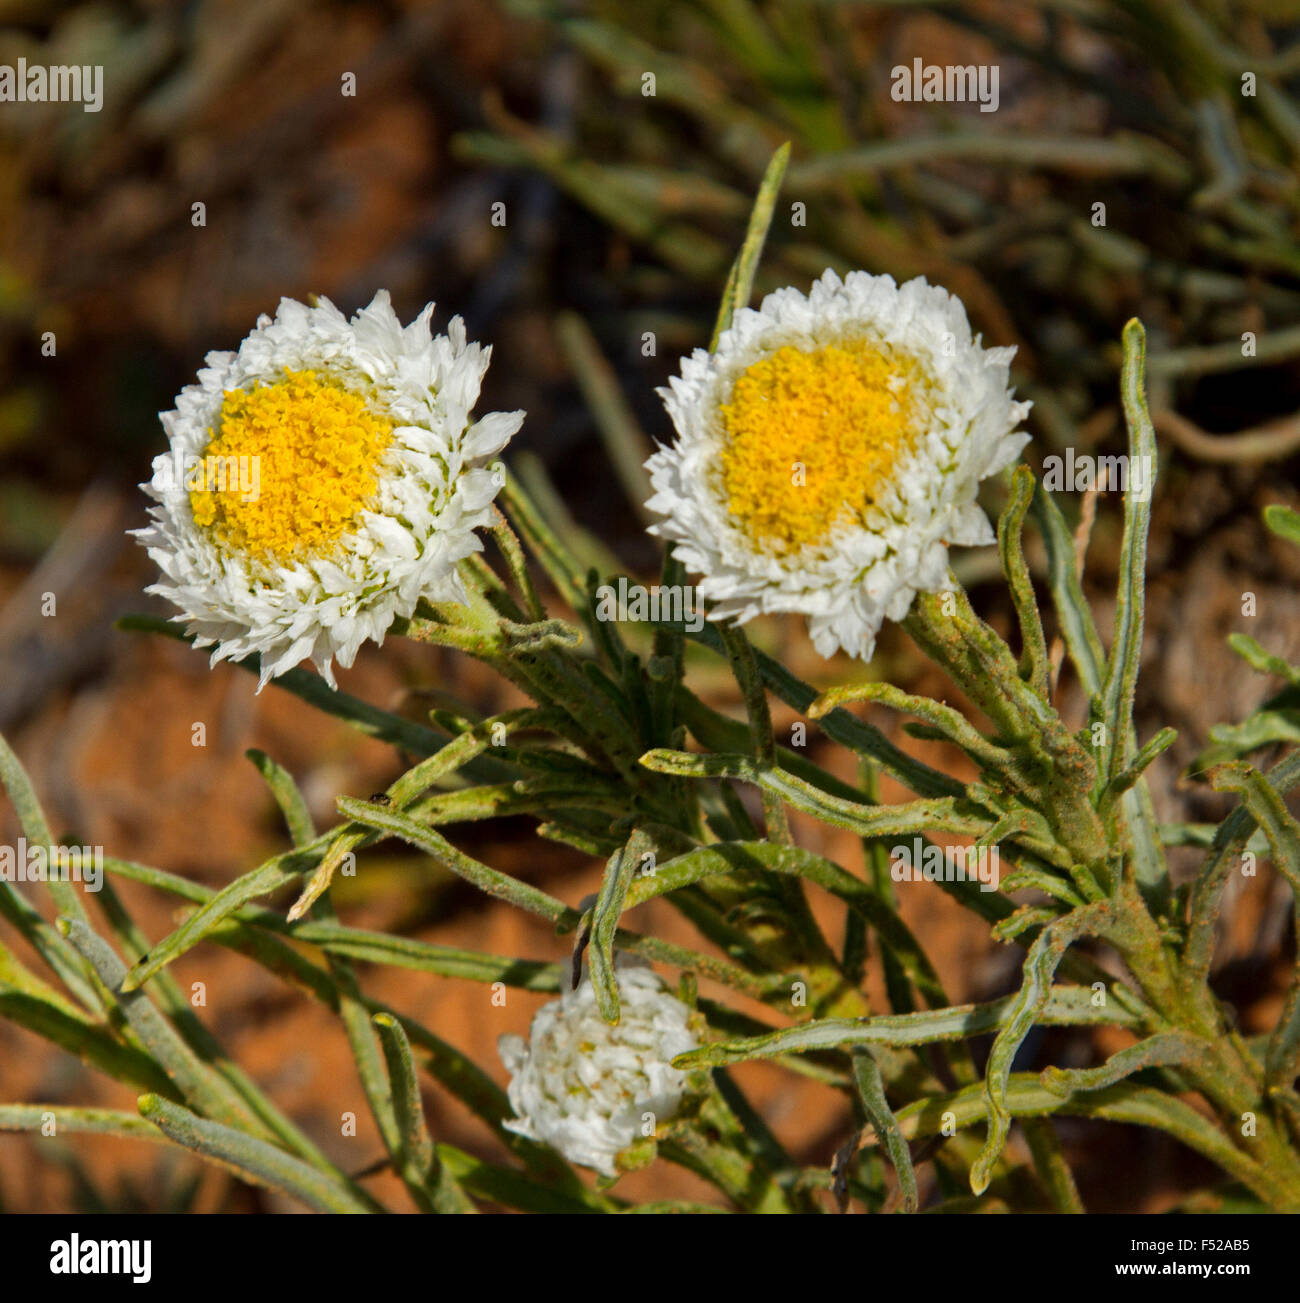 Two yellow & white flowers & leaves of Polycalymma stuartii, poached egg daisies growing in outback Australia Stock Photo